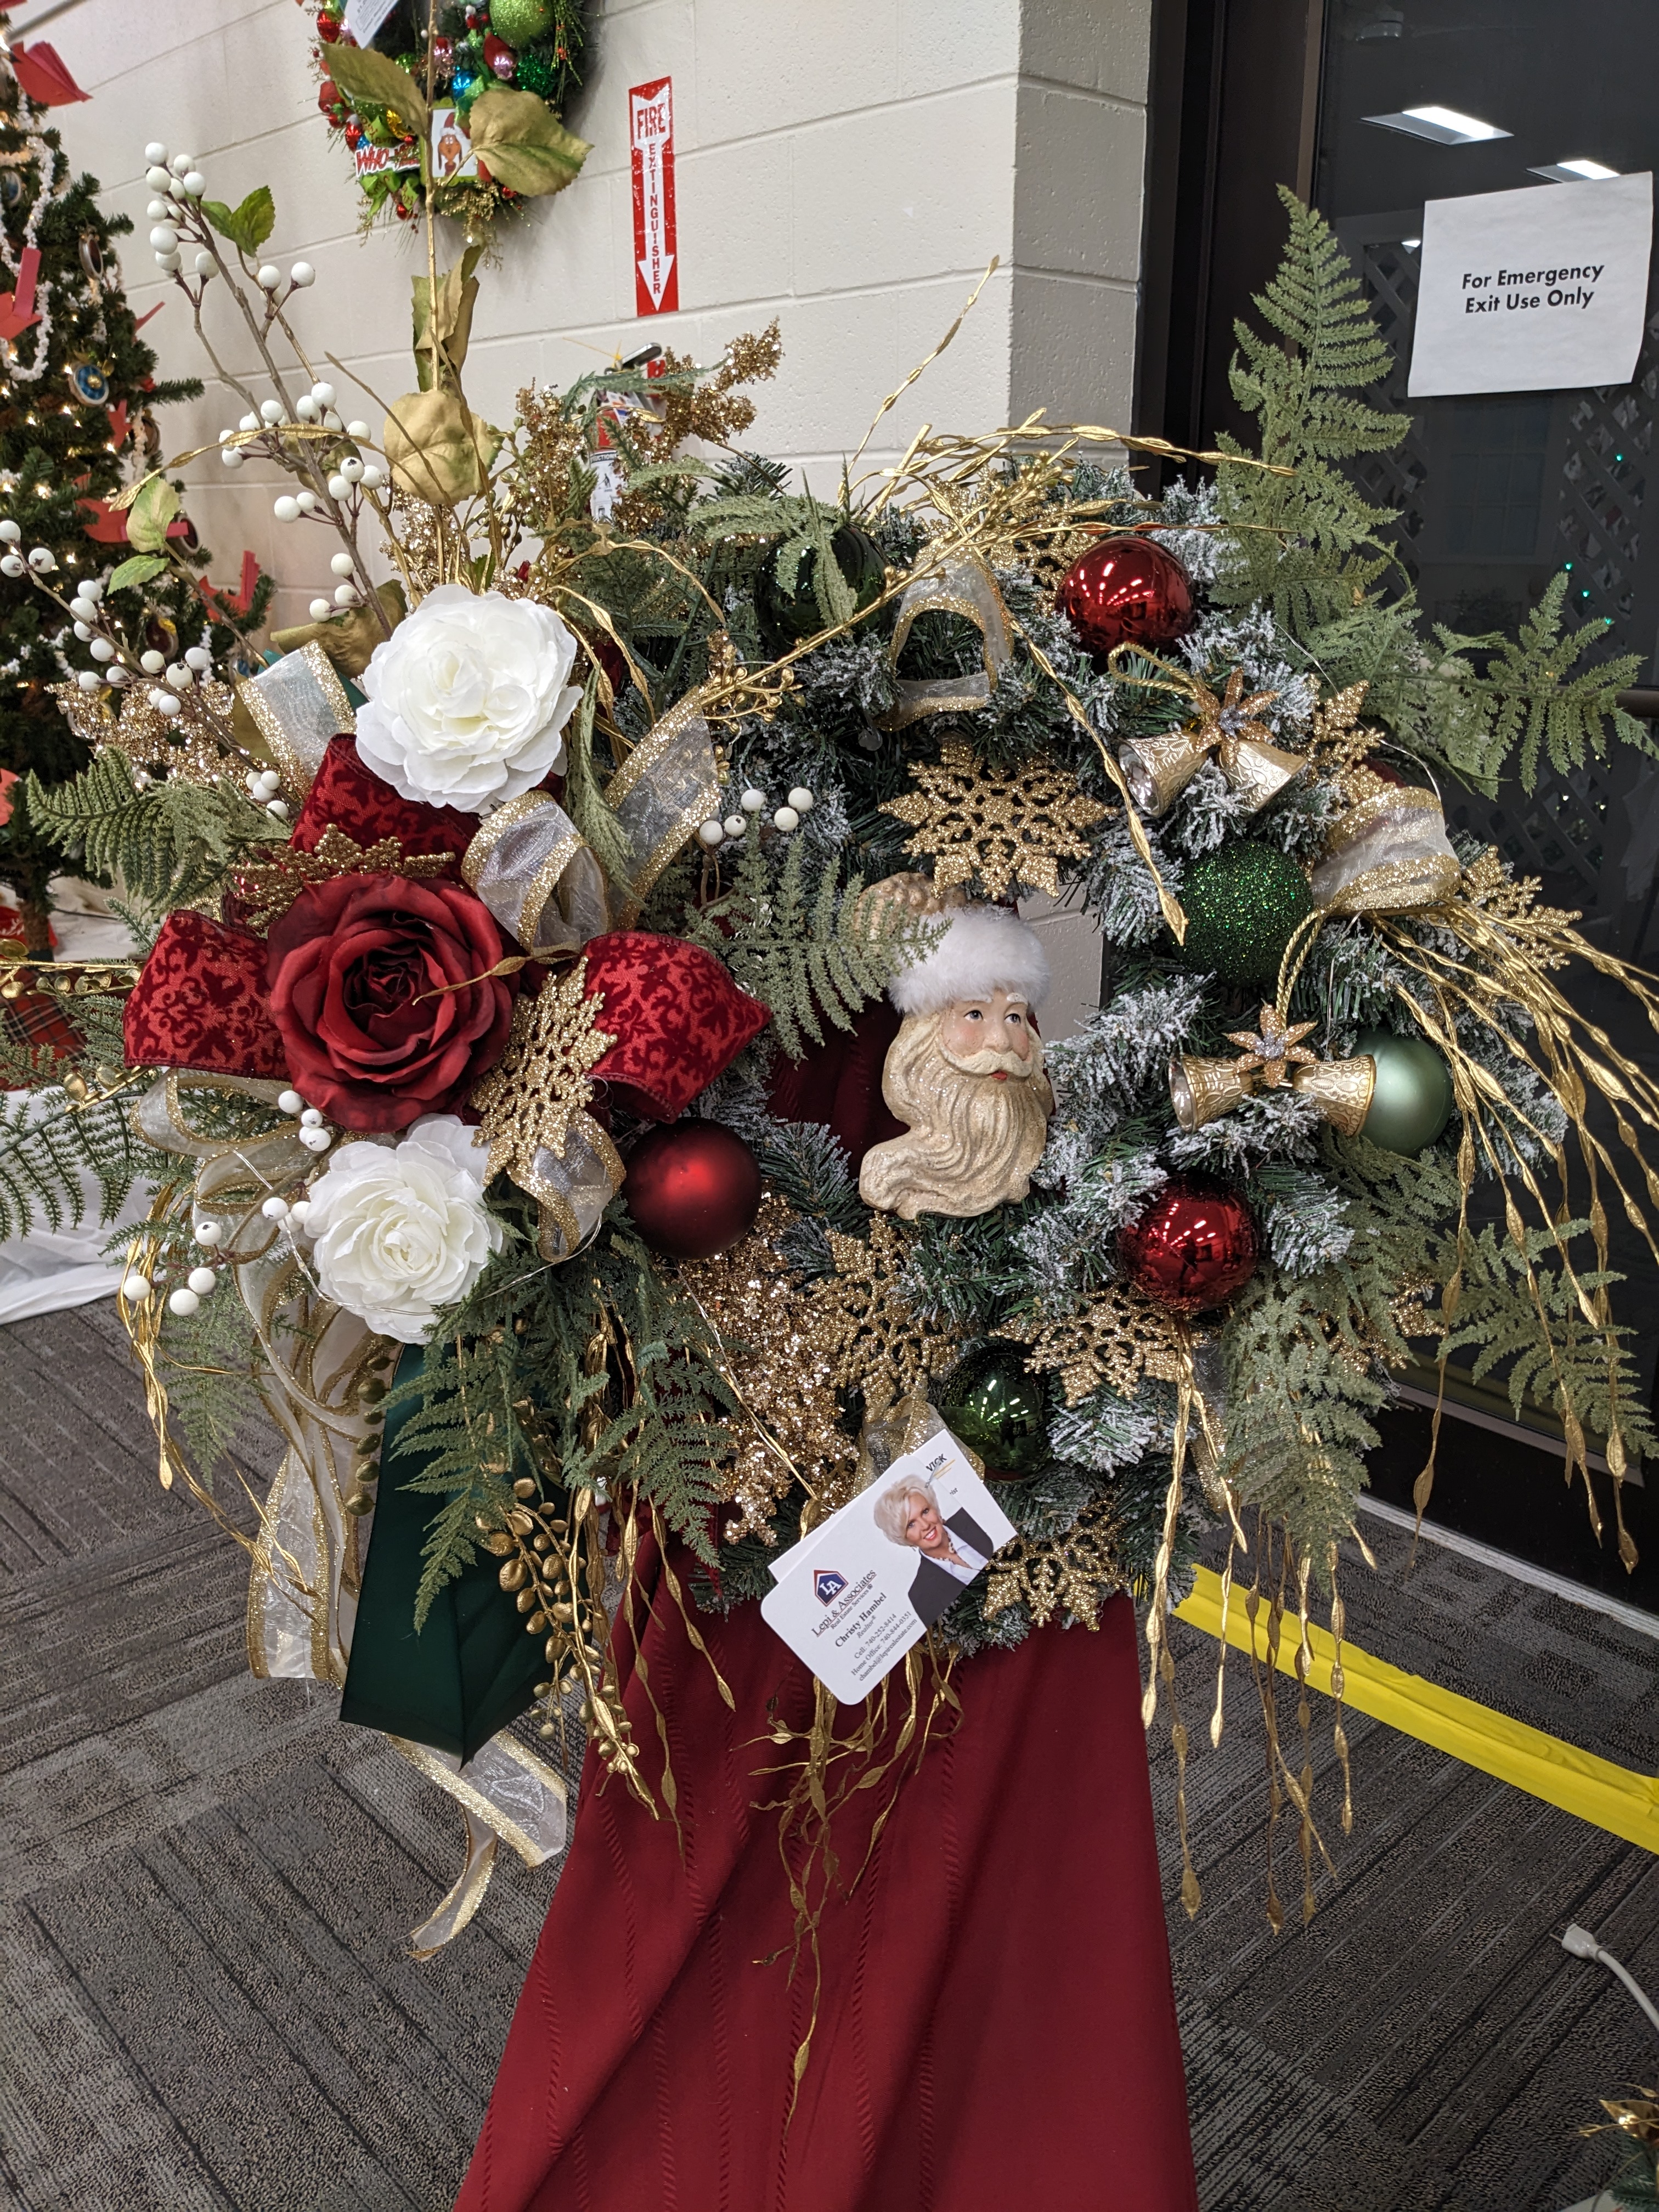 /Events/Festival Of Trees/Images/PXL_20231128_201655888